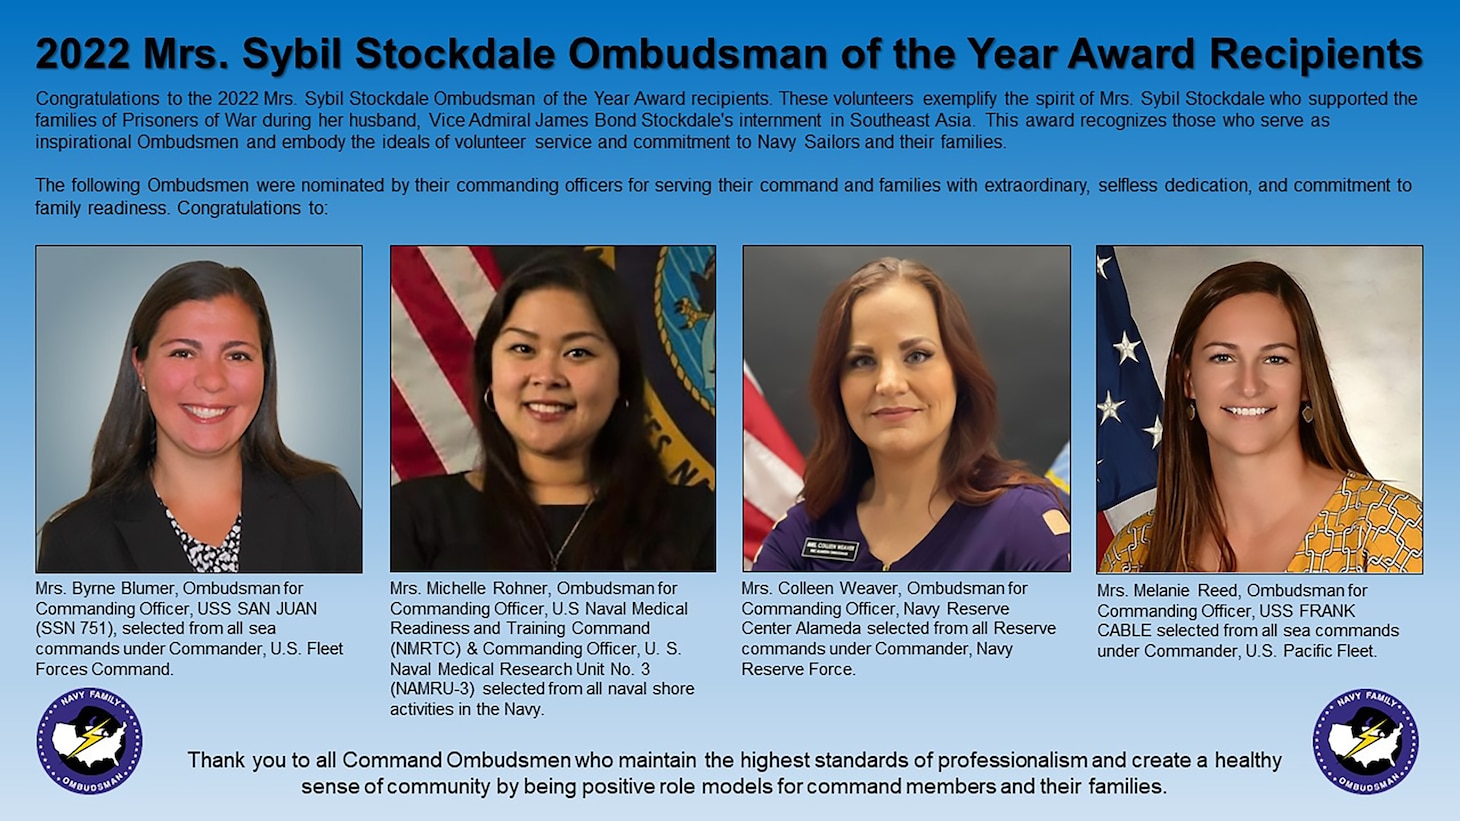 Official infographic of the 2022 Mrs. Sybil Stockdale Ombudsman of the Year Award Recipients.